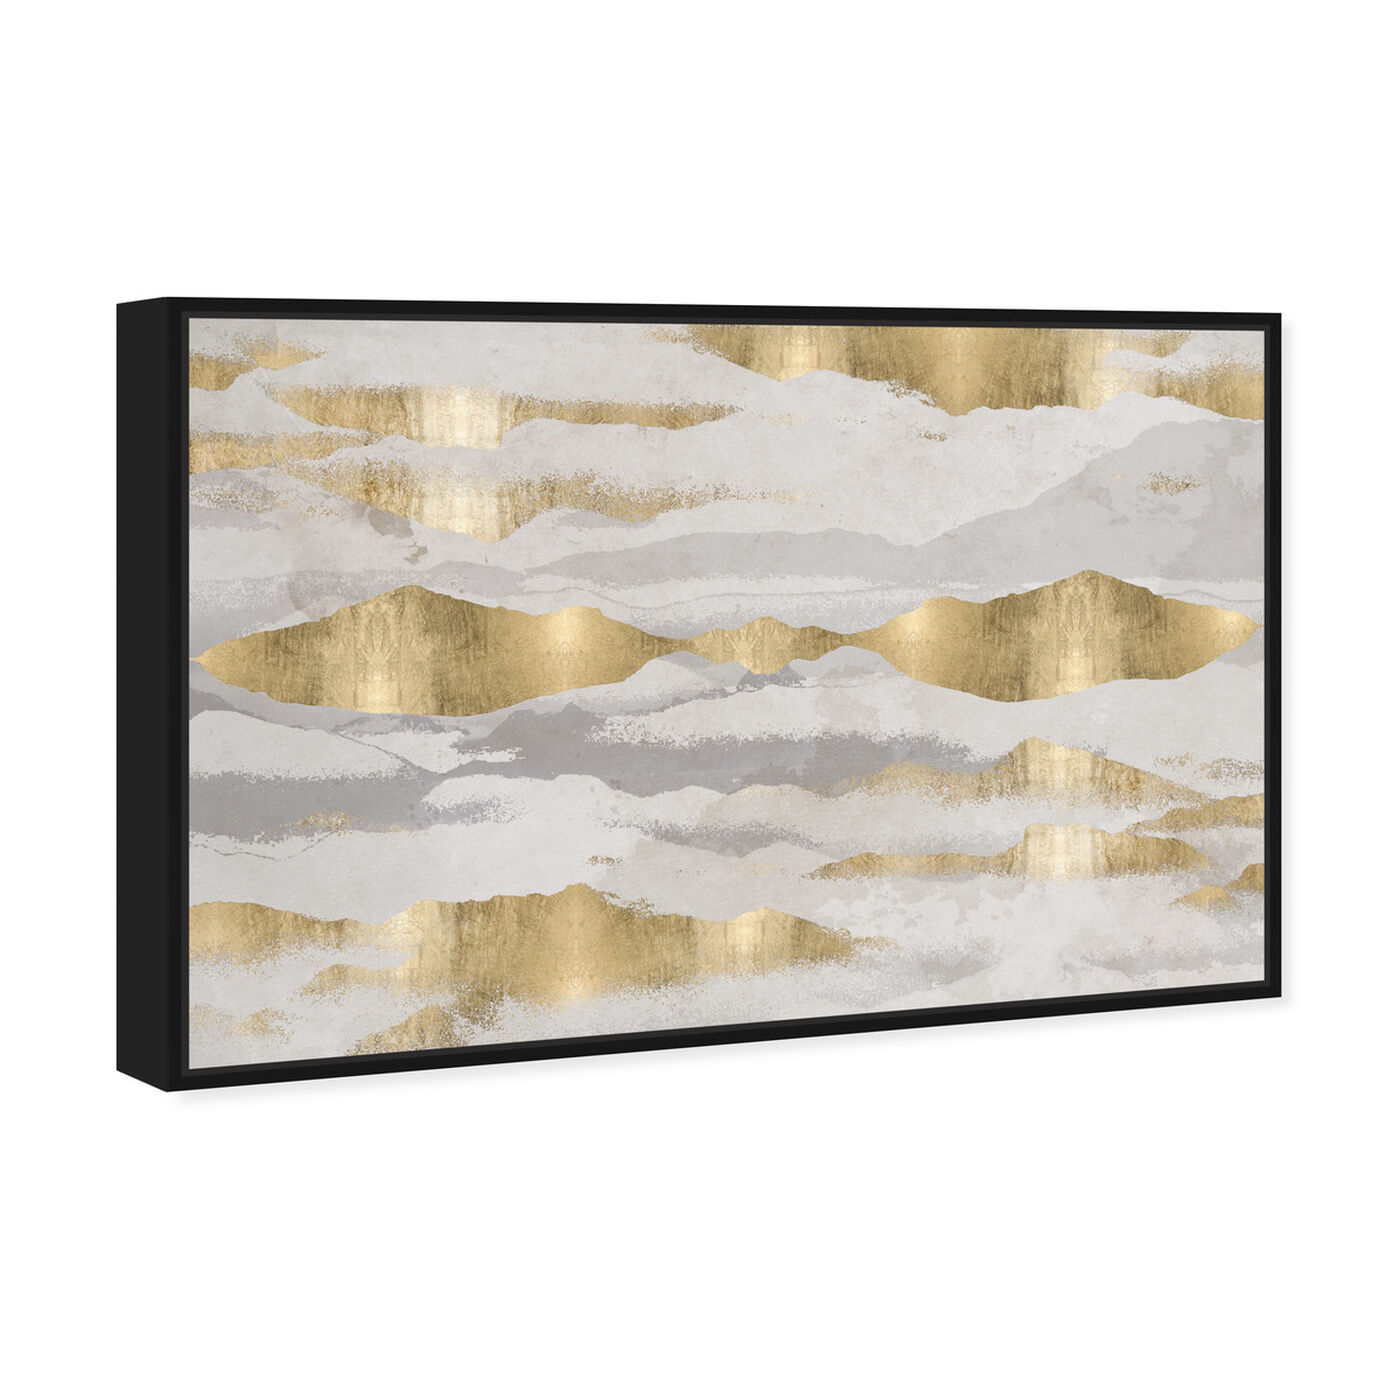 Angled view of Mountains Of Life featuring abstract and textures art.